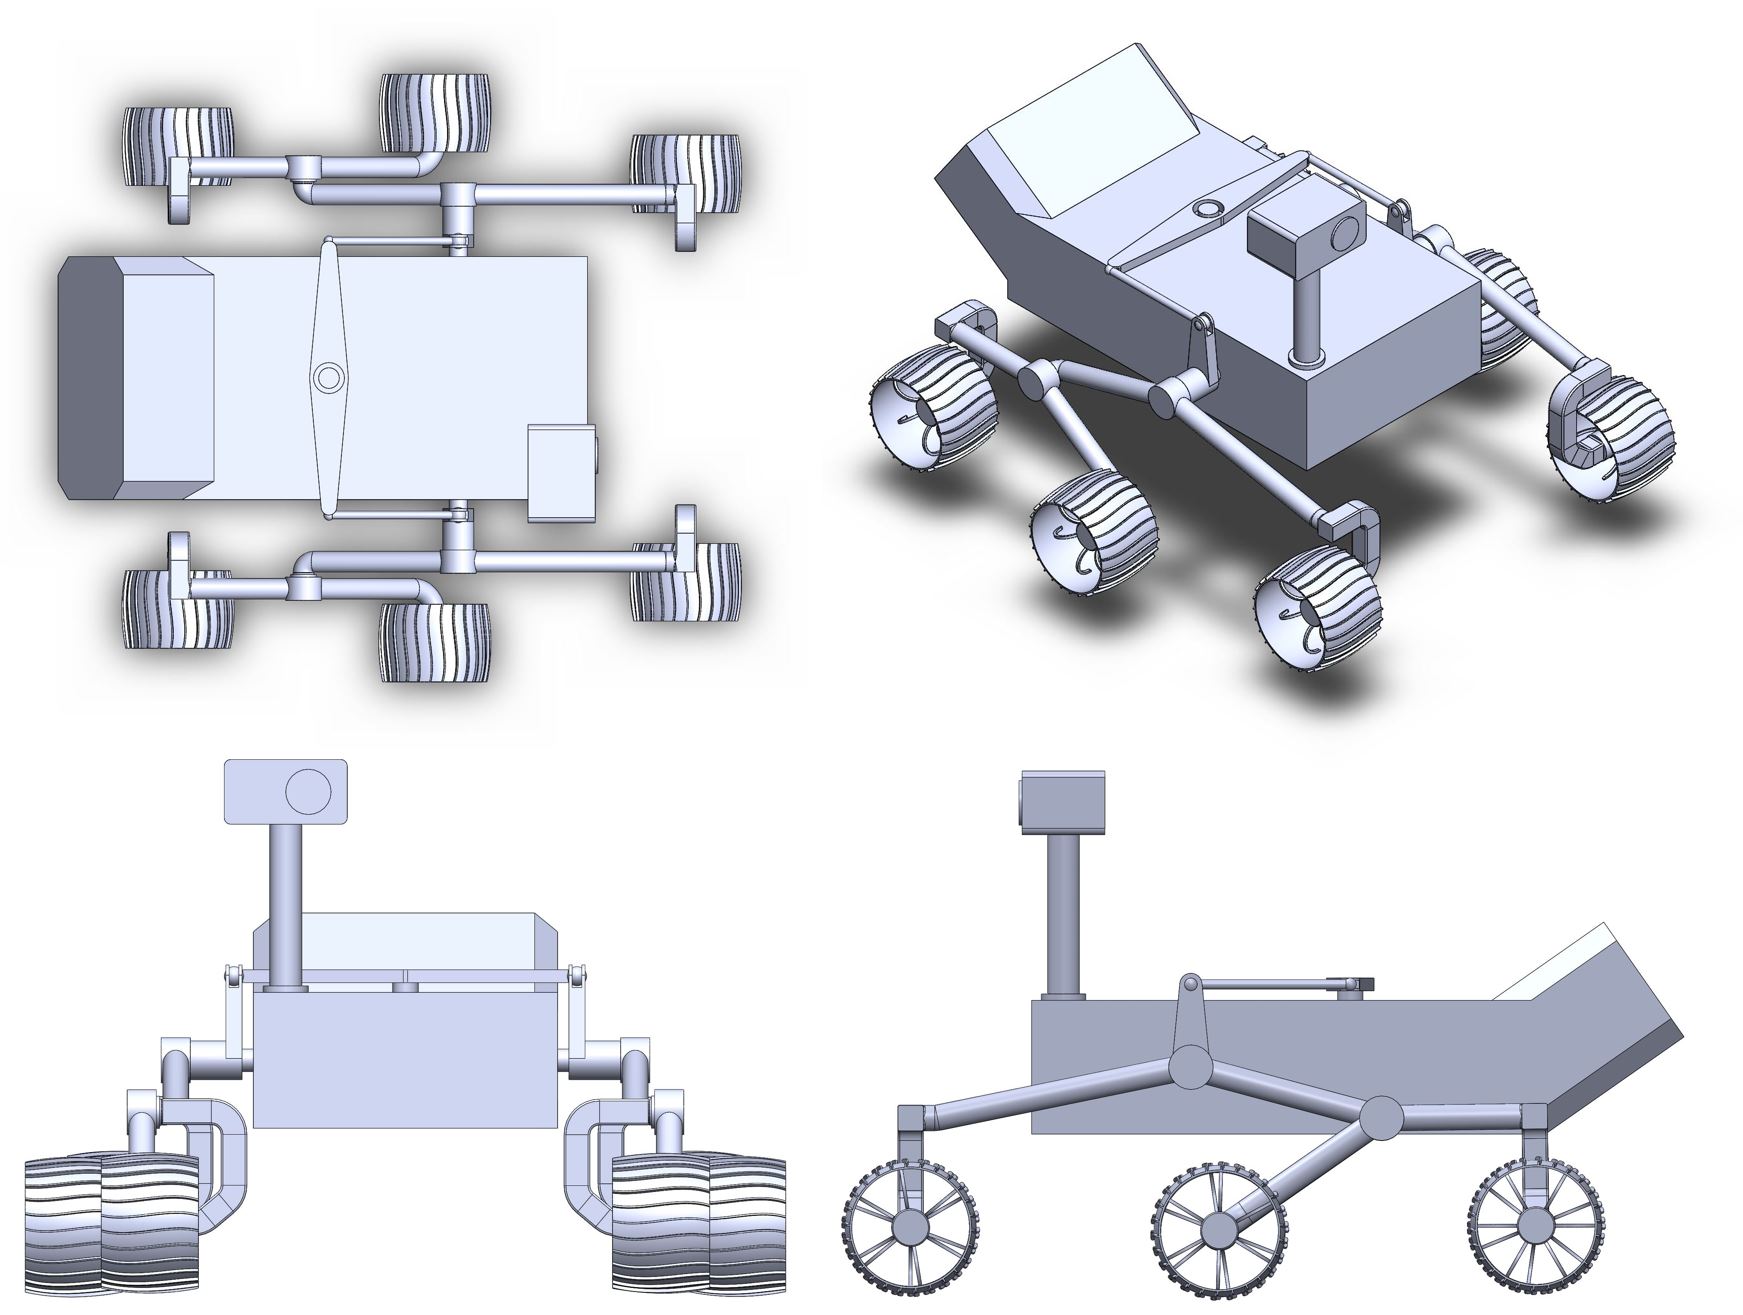 mars rover curiosity solidworks